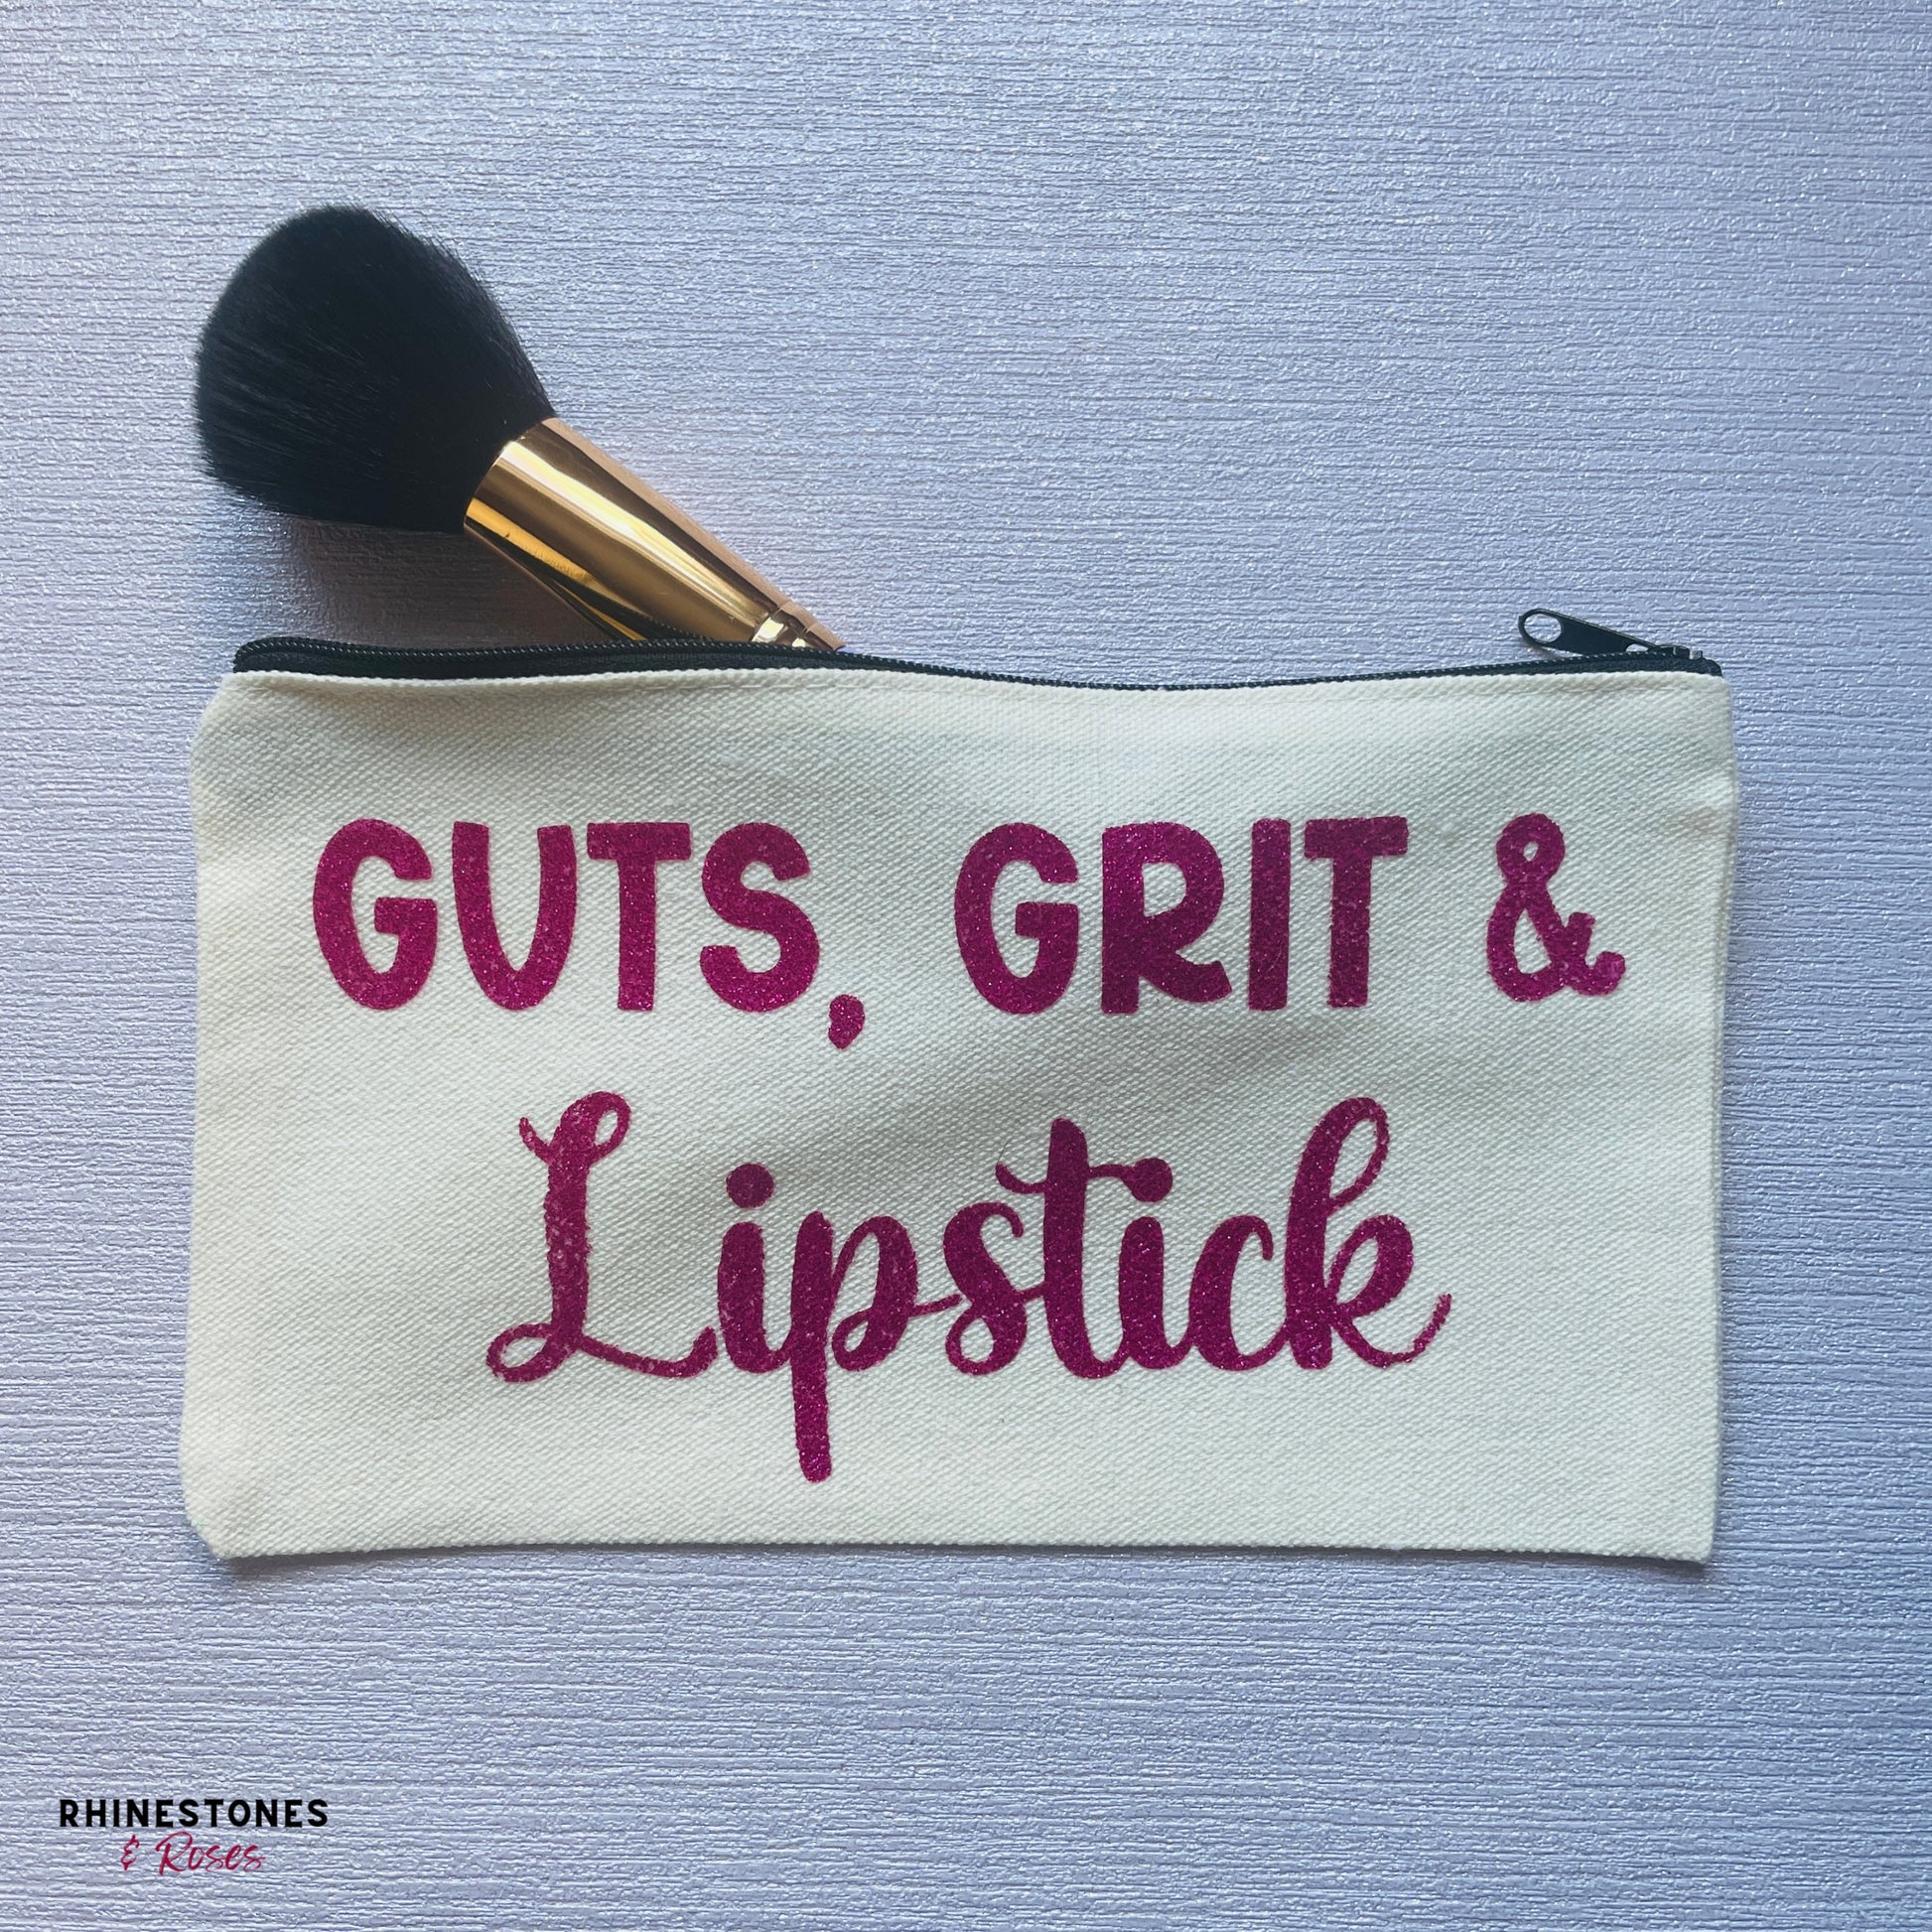 Motivational cosmetic bag featuring the phrase Guts, Grit and Lipstick